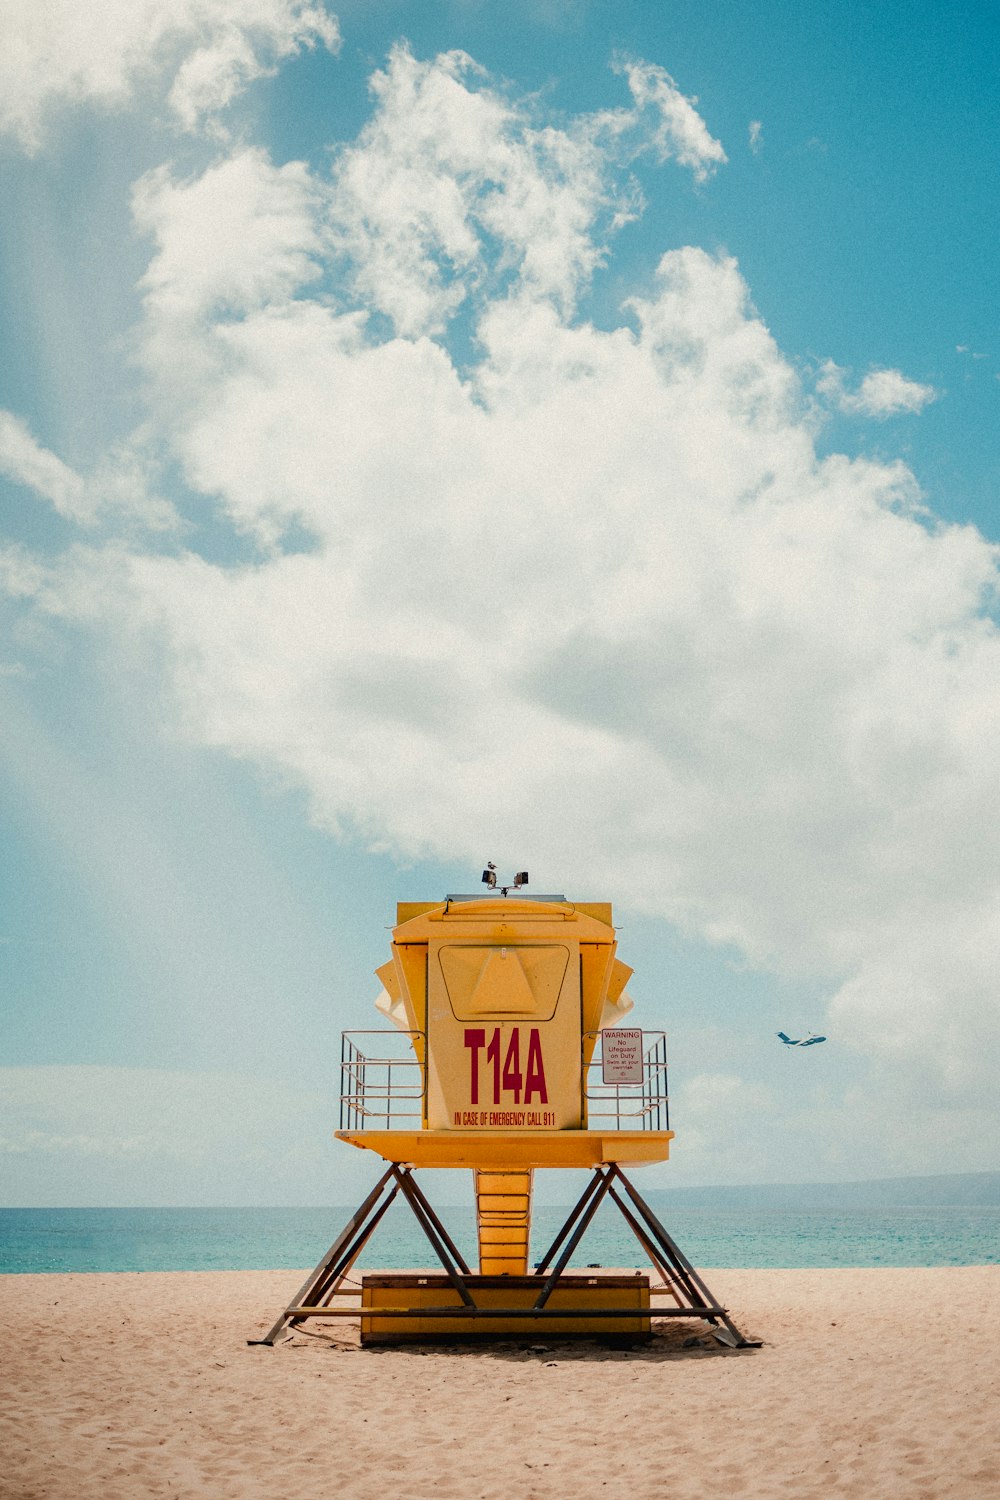 orange and black lifeguard tower on beach during daytime